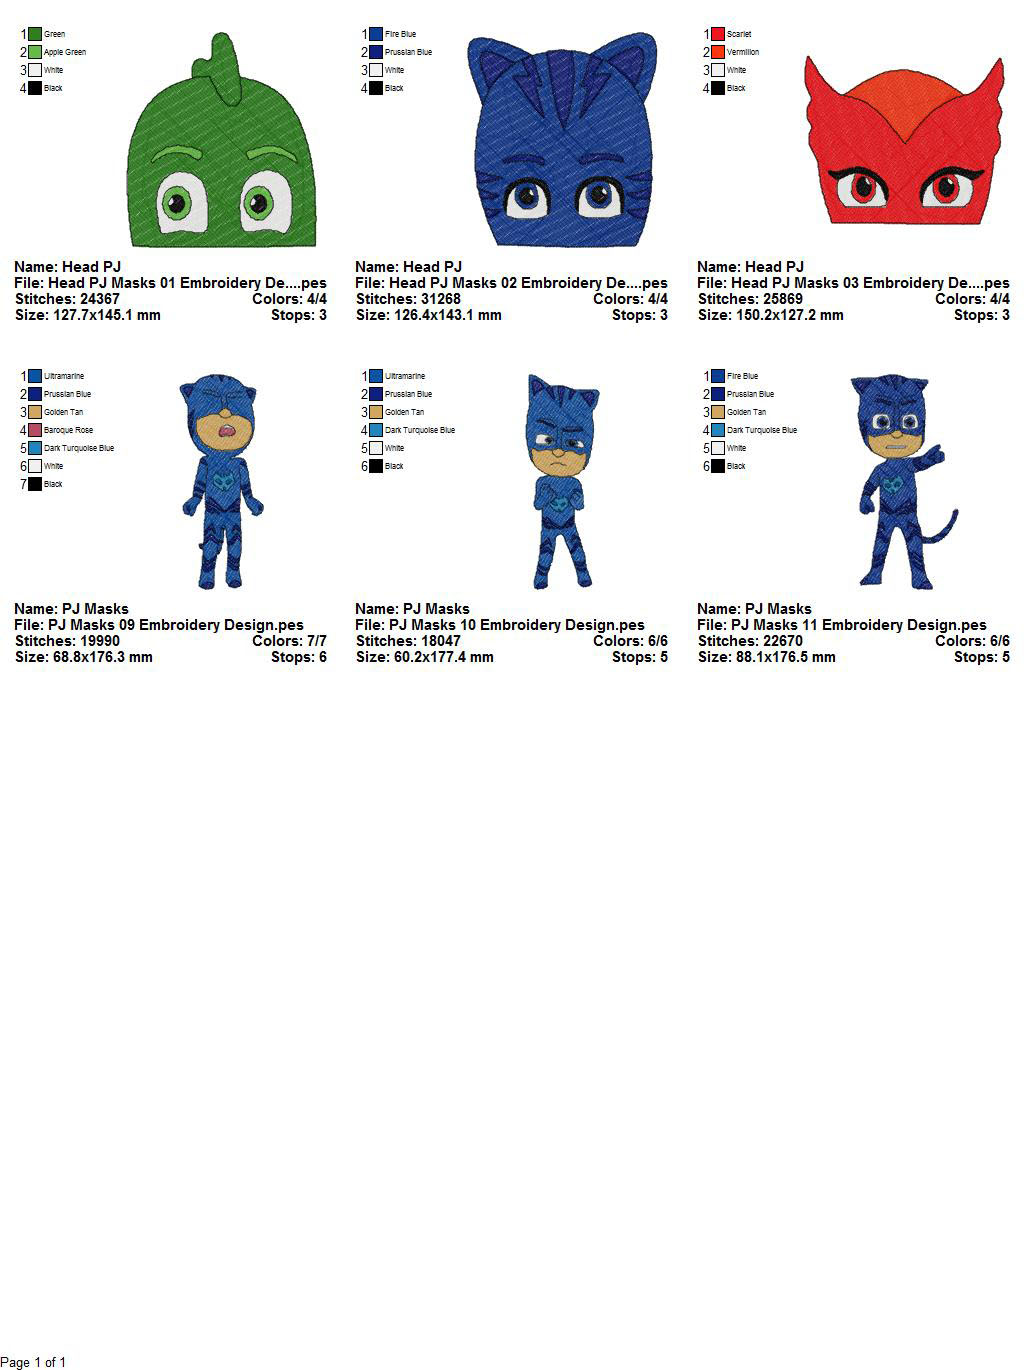 Package 6 PJ Masks 03 Embroidery Designs